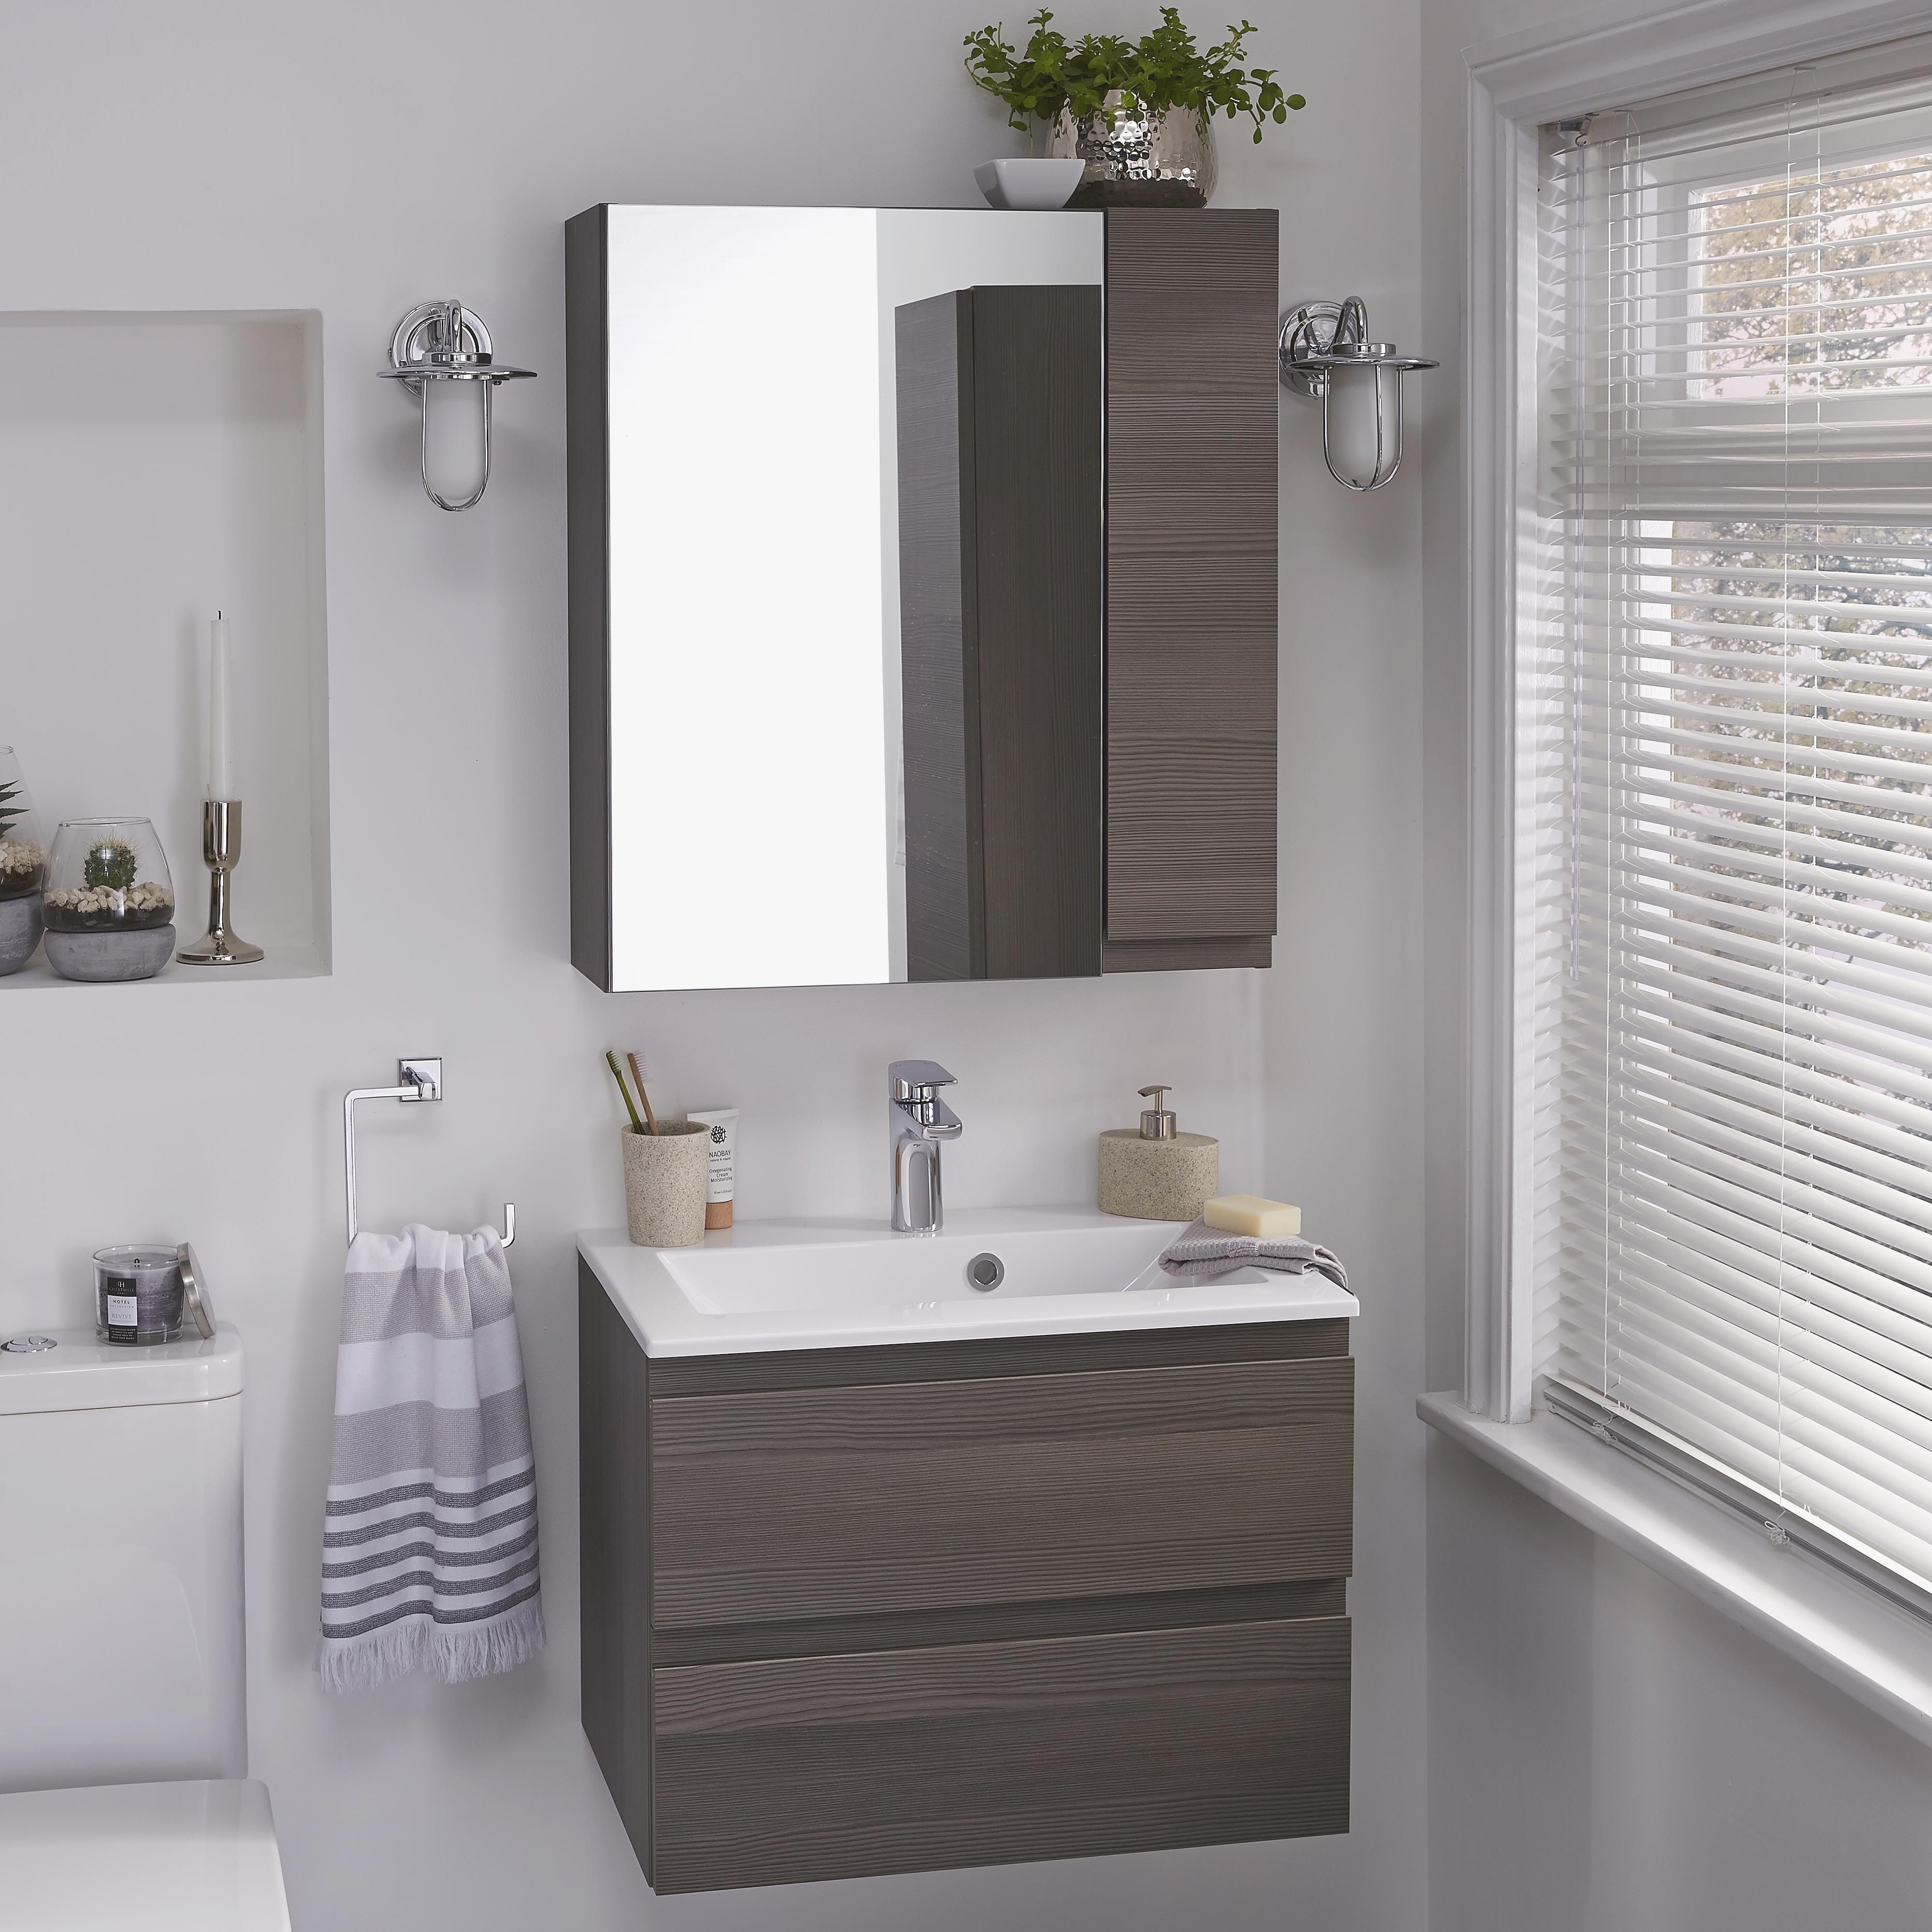 Bathroom Cabinets And Storage Best Cooke Lewis Paolo Bodega Grey with sizing 3731 X 3731